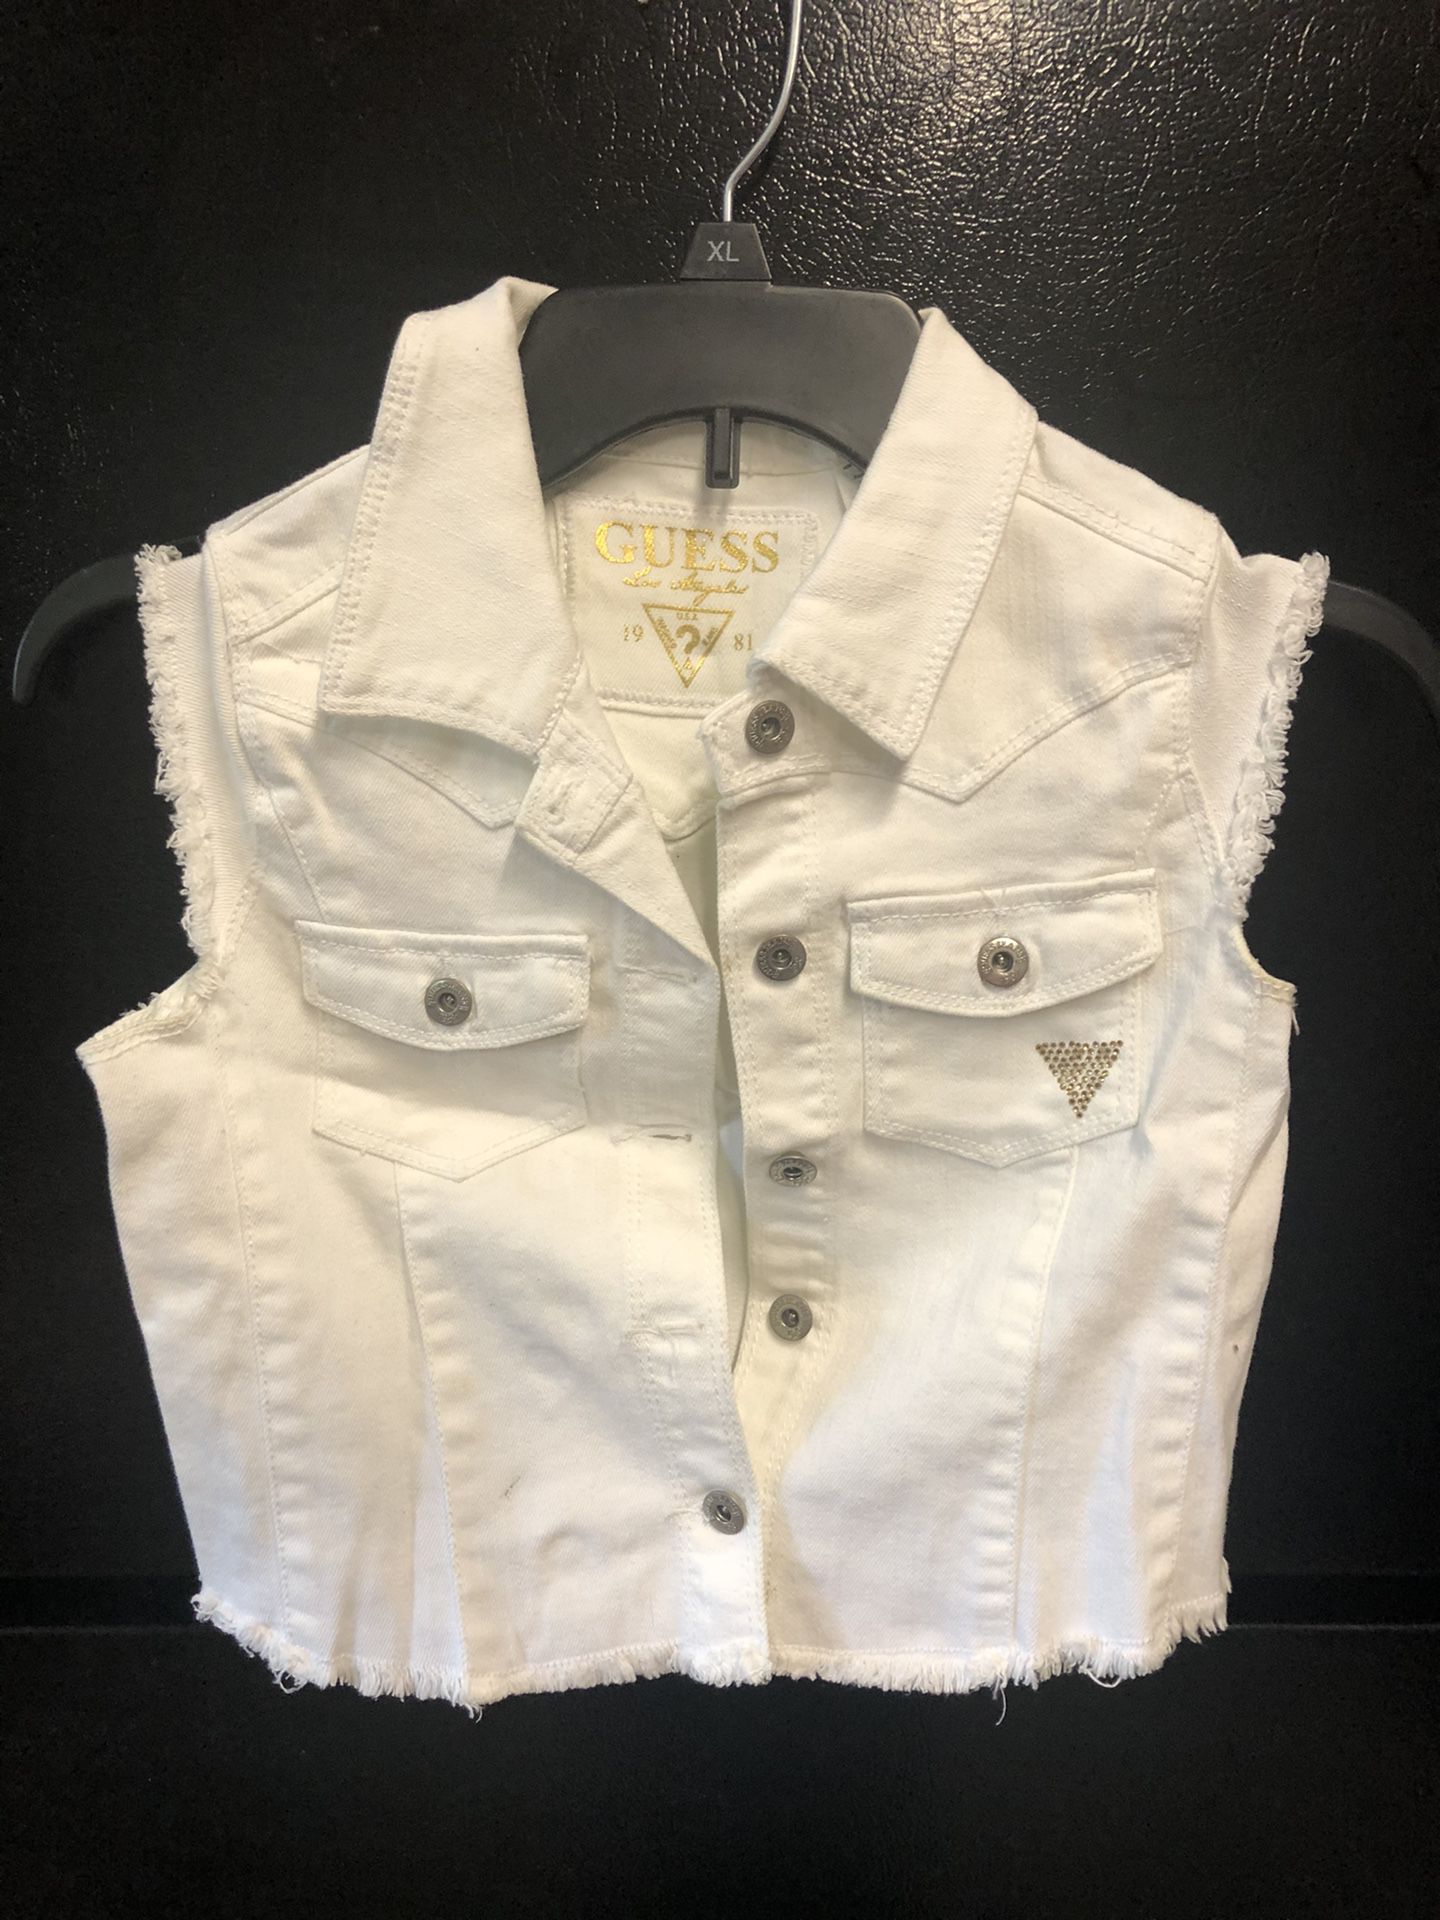 Girls size 10 guess white vest and summer and winter clothes for kids all ages and men’s and women’s and juniors. Let me know what you’re looking for